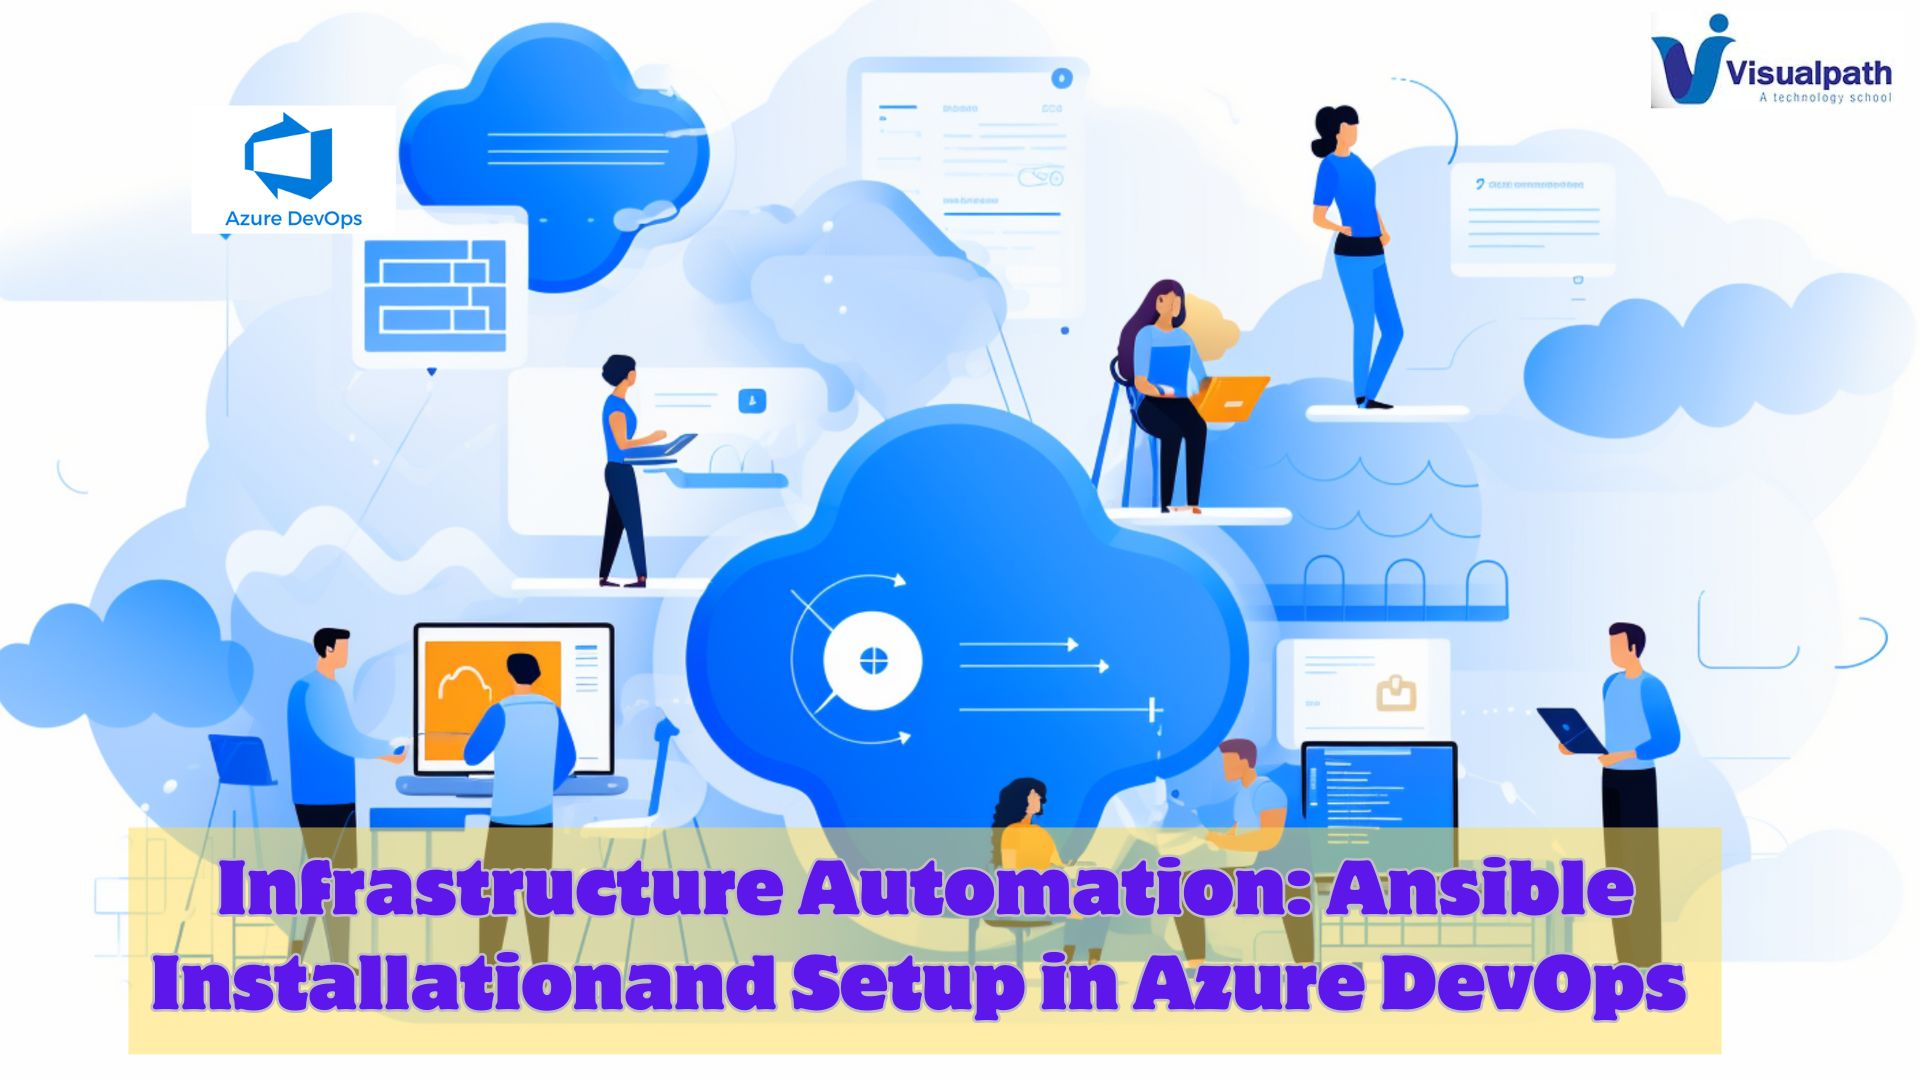 Simplifying Infrastructure Automation: Ansible Installation and Setup in Azure DevOps